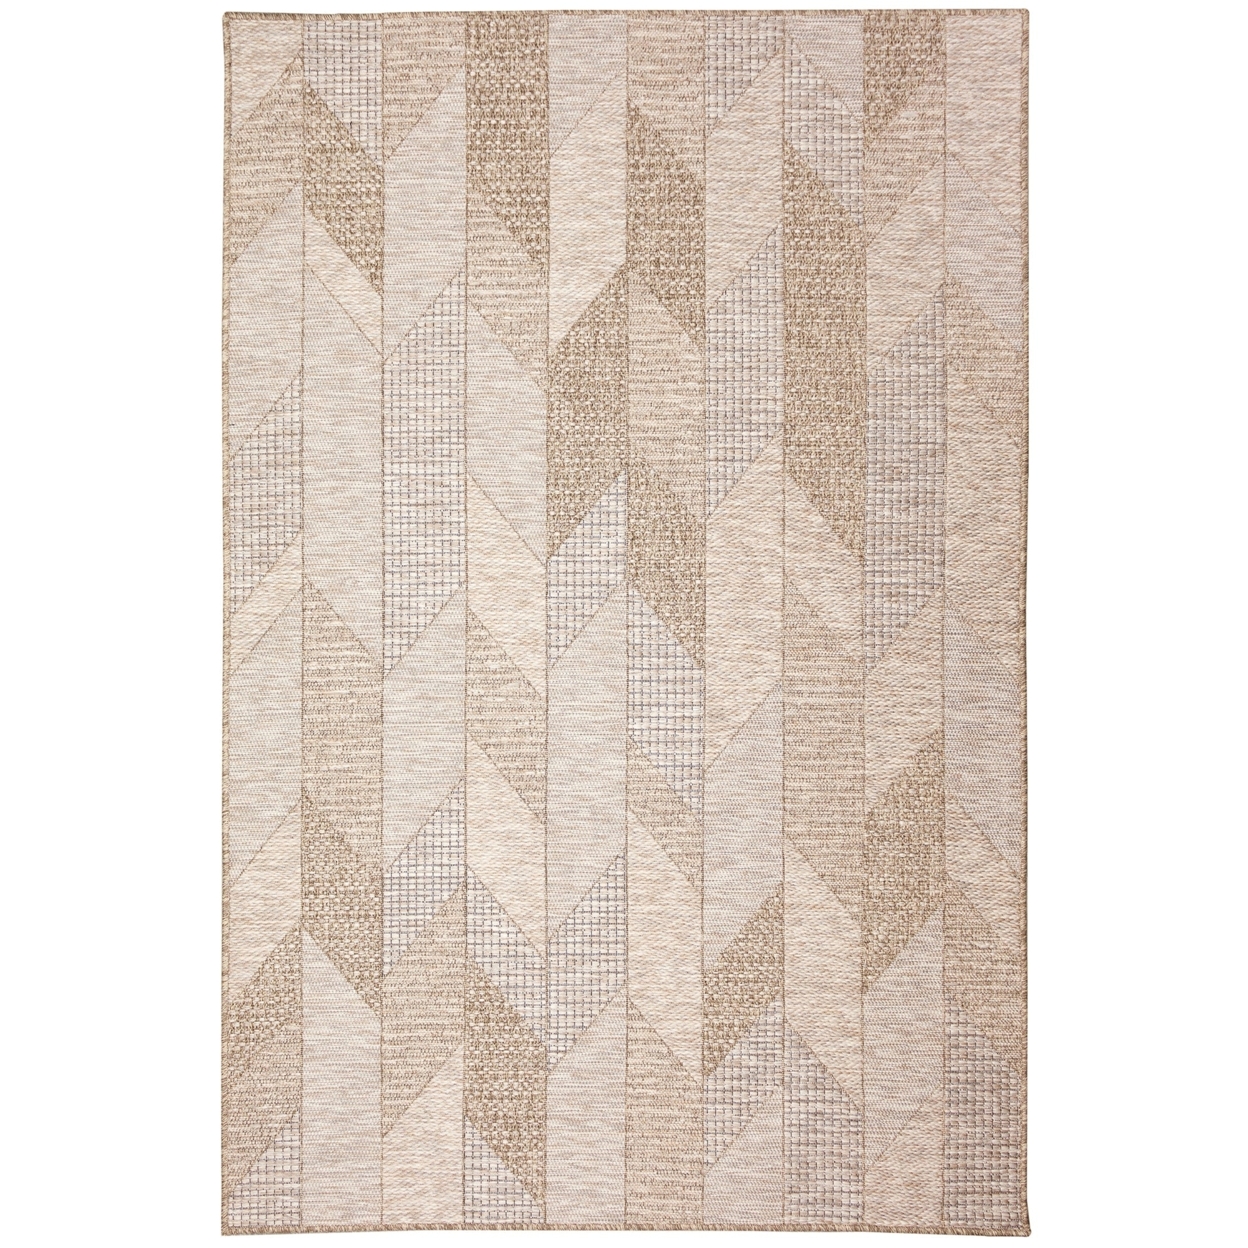 Liora Manne Orly Angles Indoor Outdoor Area Rug Natural - 5'3 X 7'3